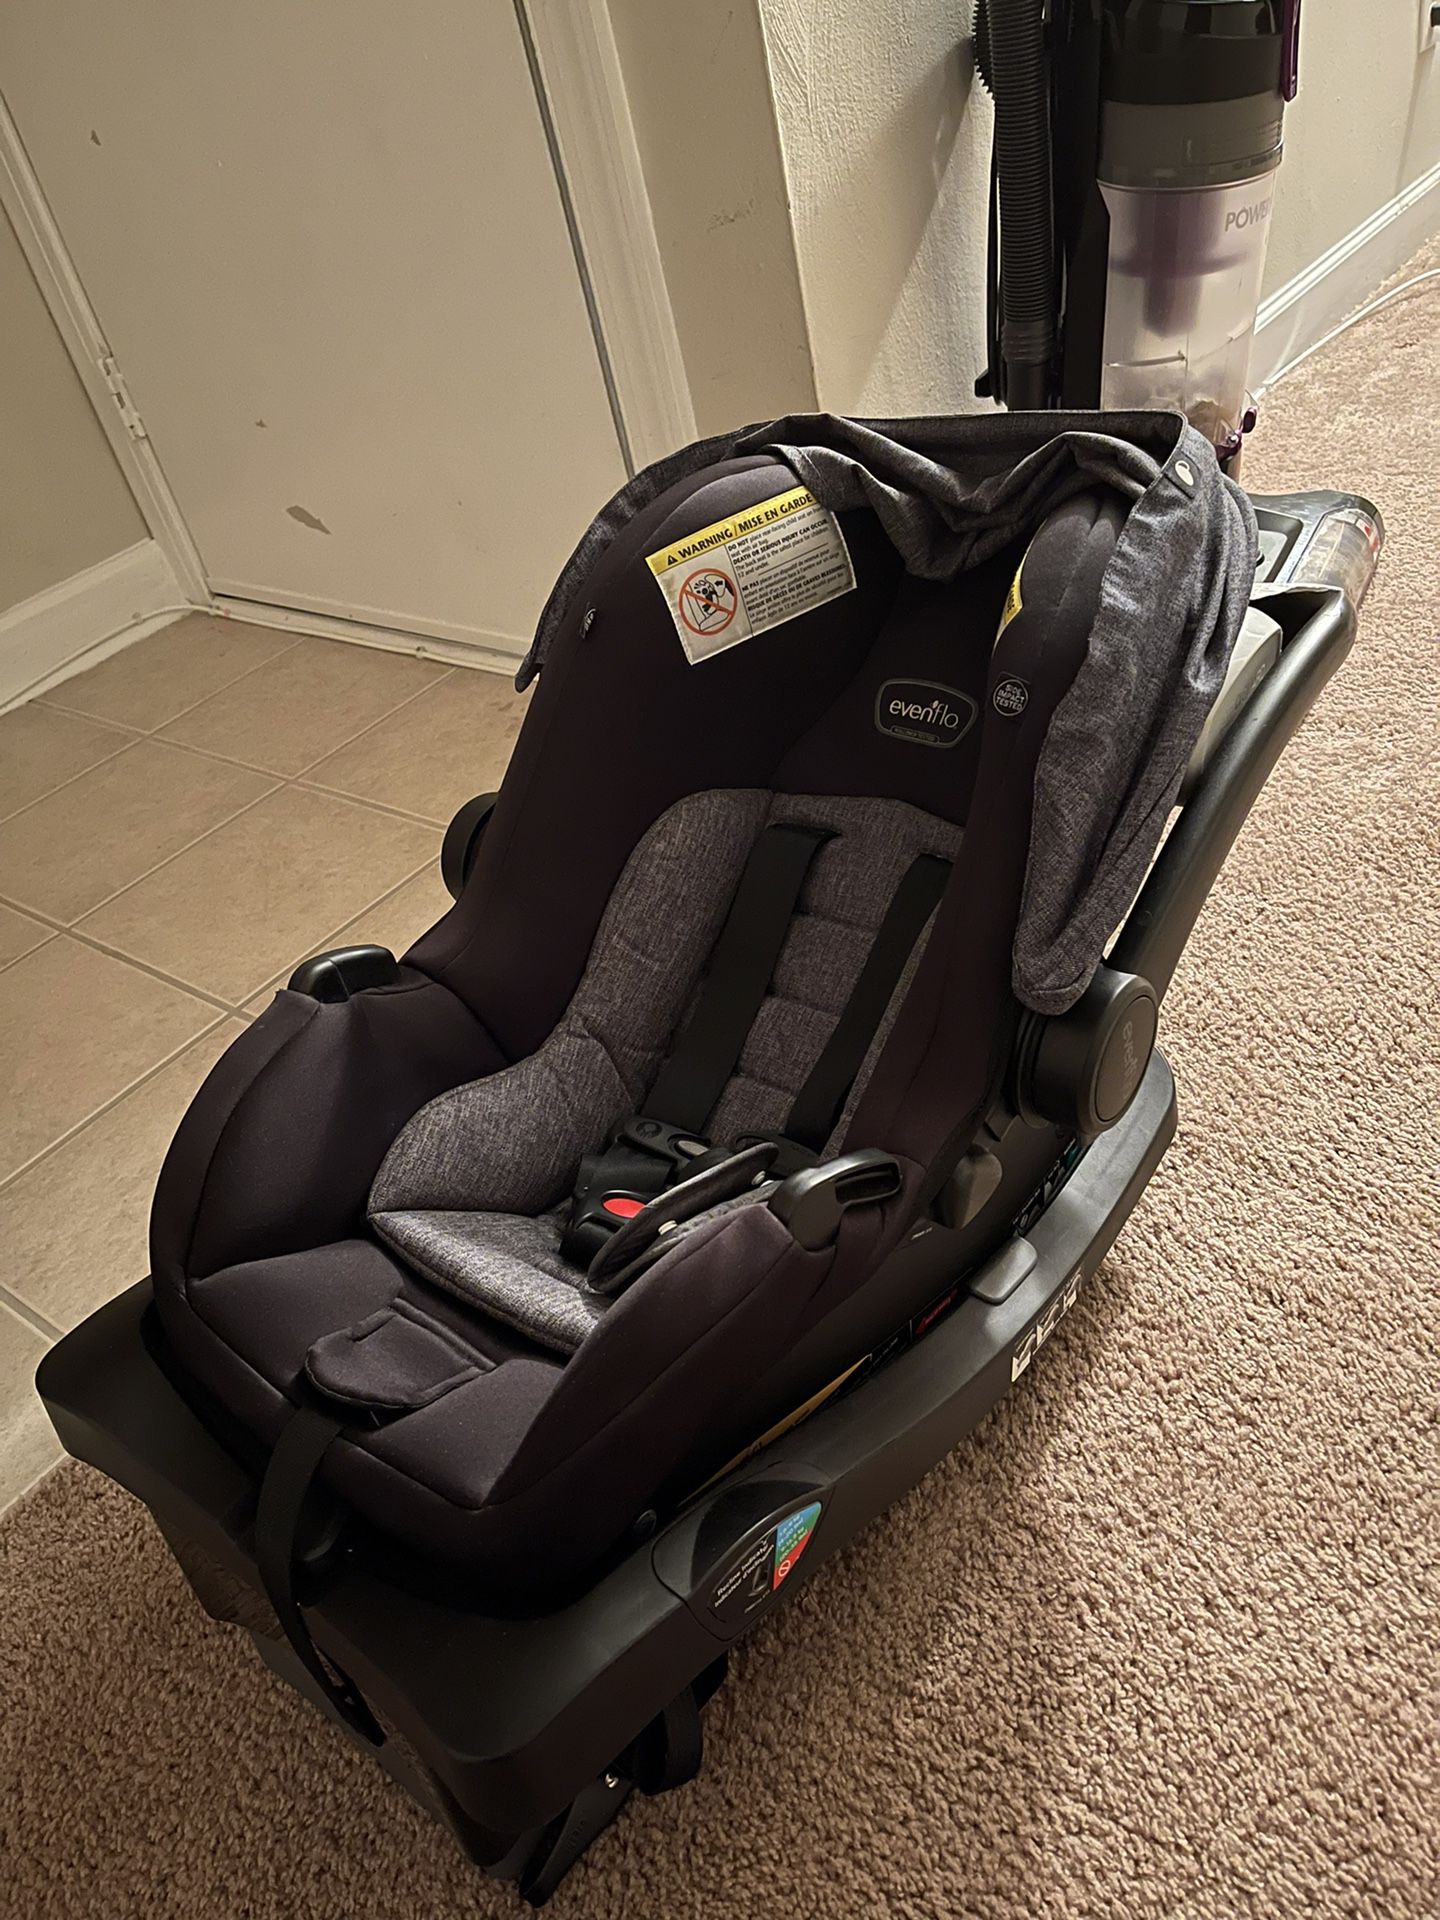 EVENFLO CARSEAT GREAT CONDITION NEED GONE ASAP!! 